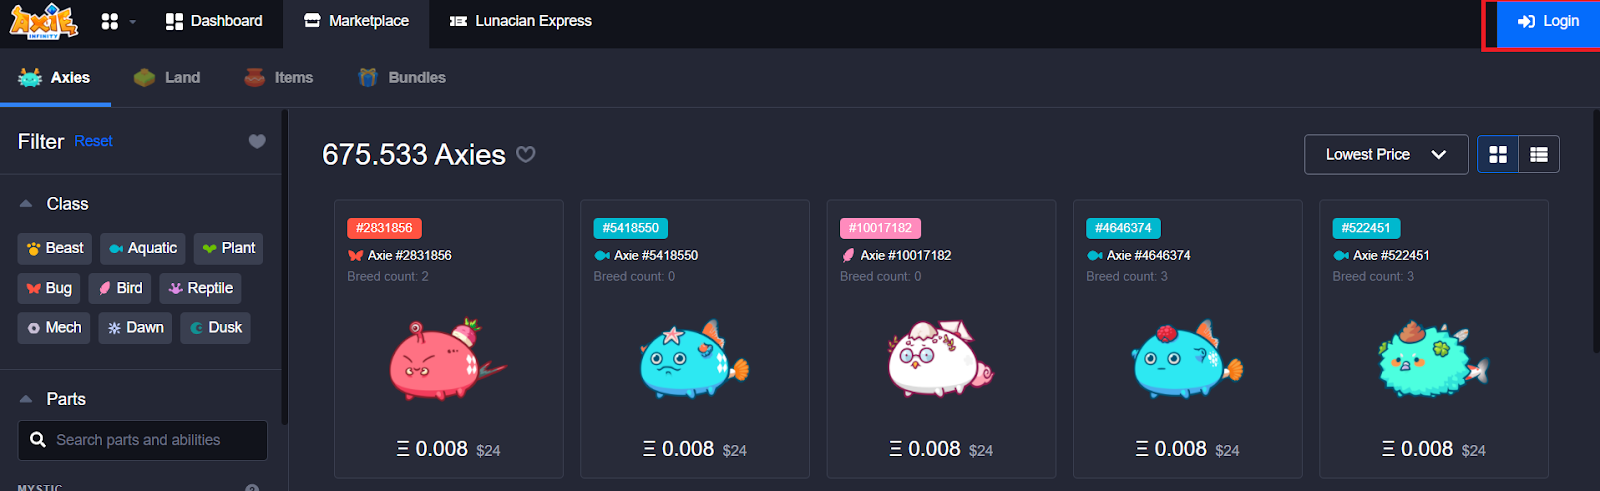 How to start in Axie Infinity? step by step guide